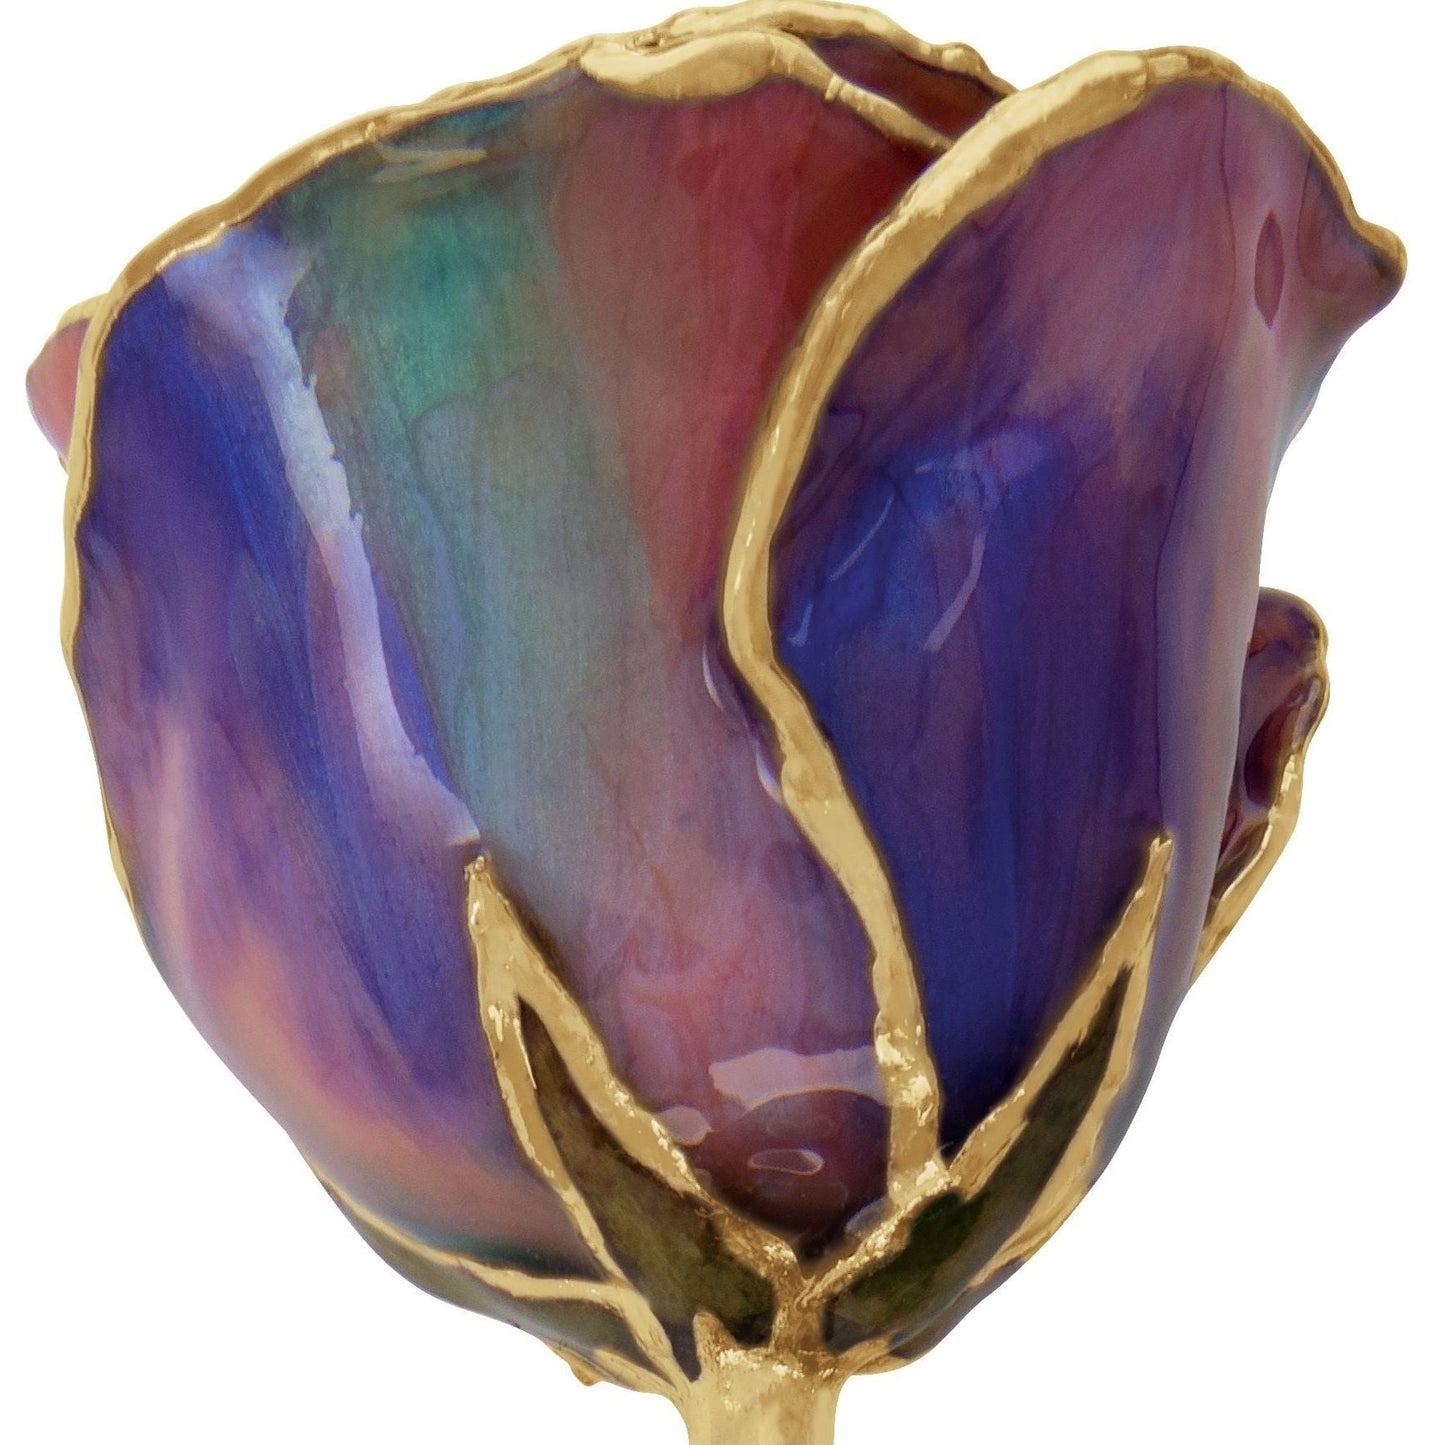 Preserved October Opal Colored Rose with 24K Gold Trim for Luxury Home Decor